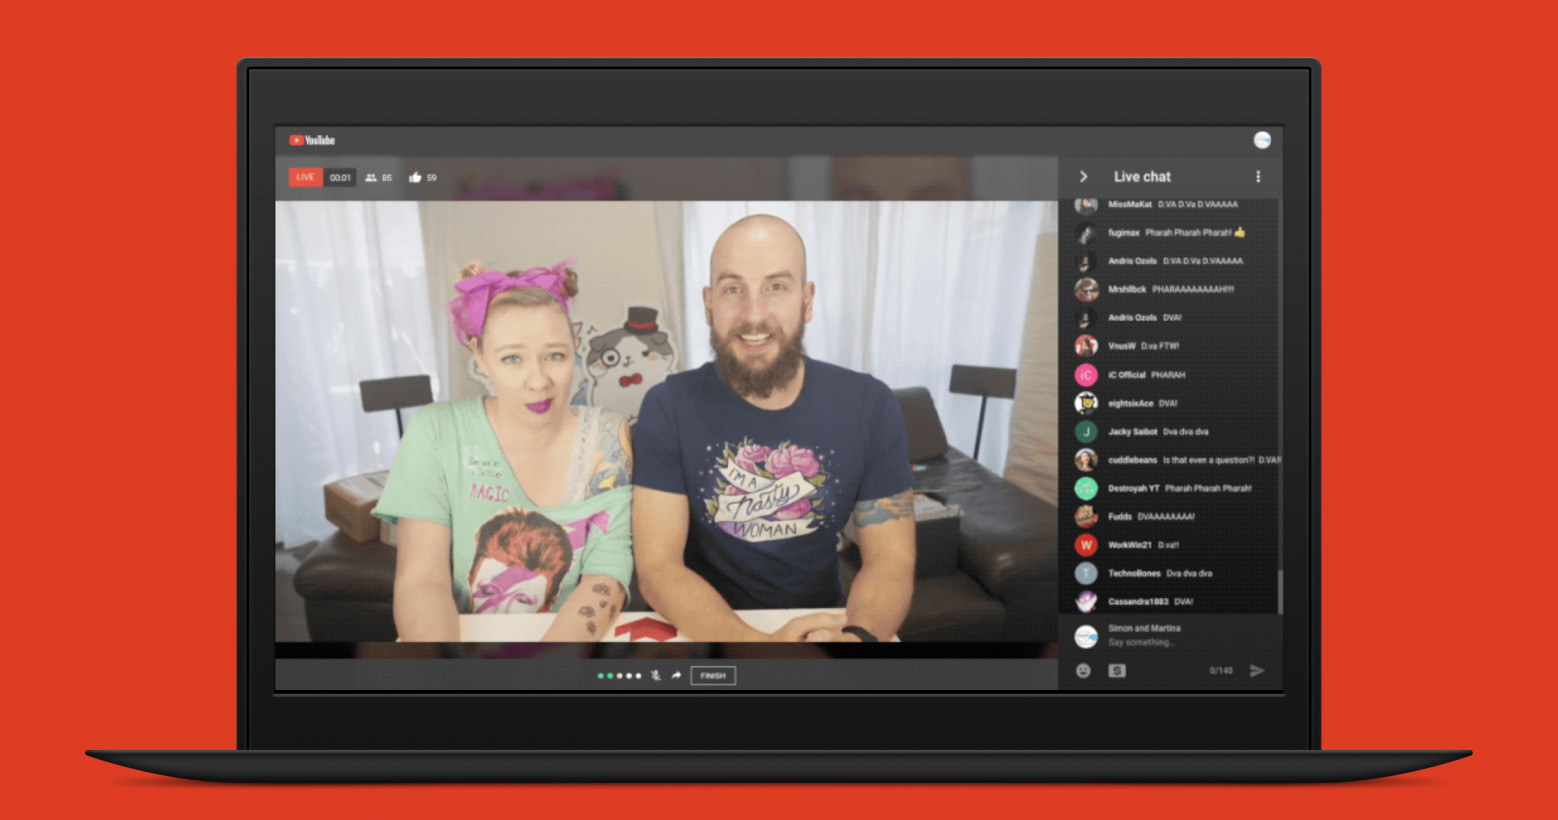 YouTube now lets you livestream straight from your webcam